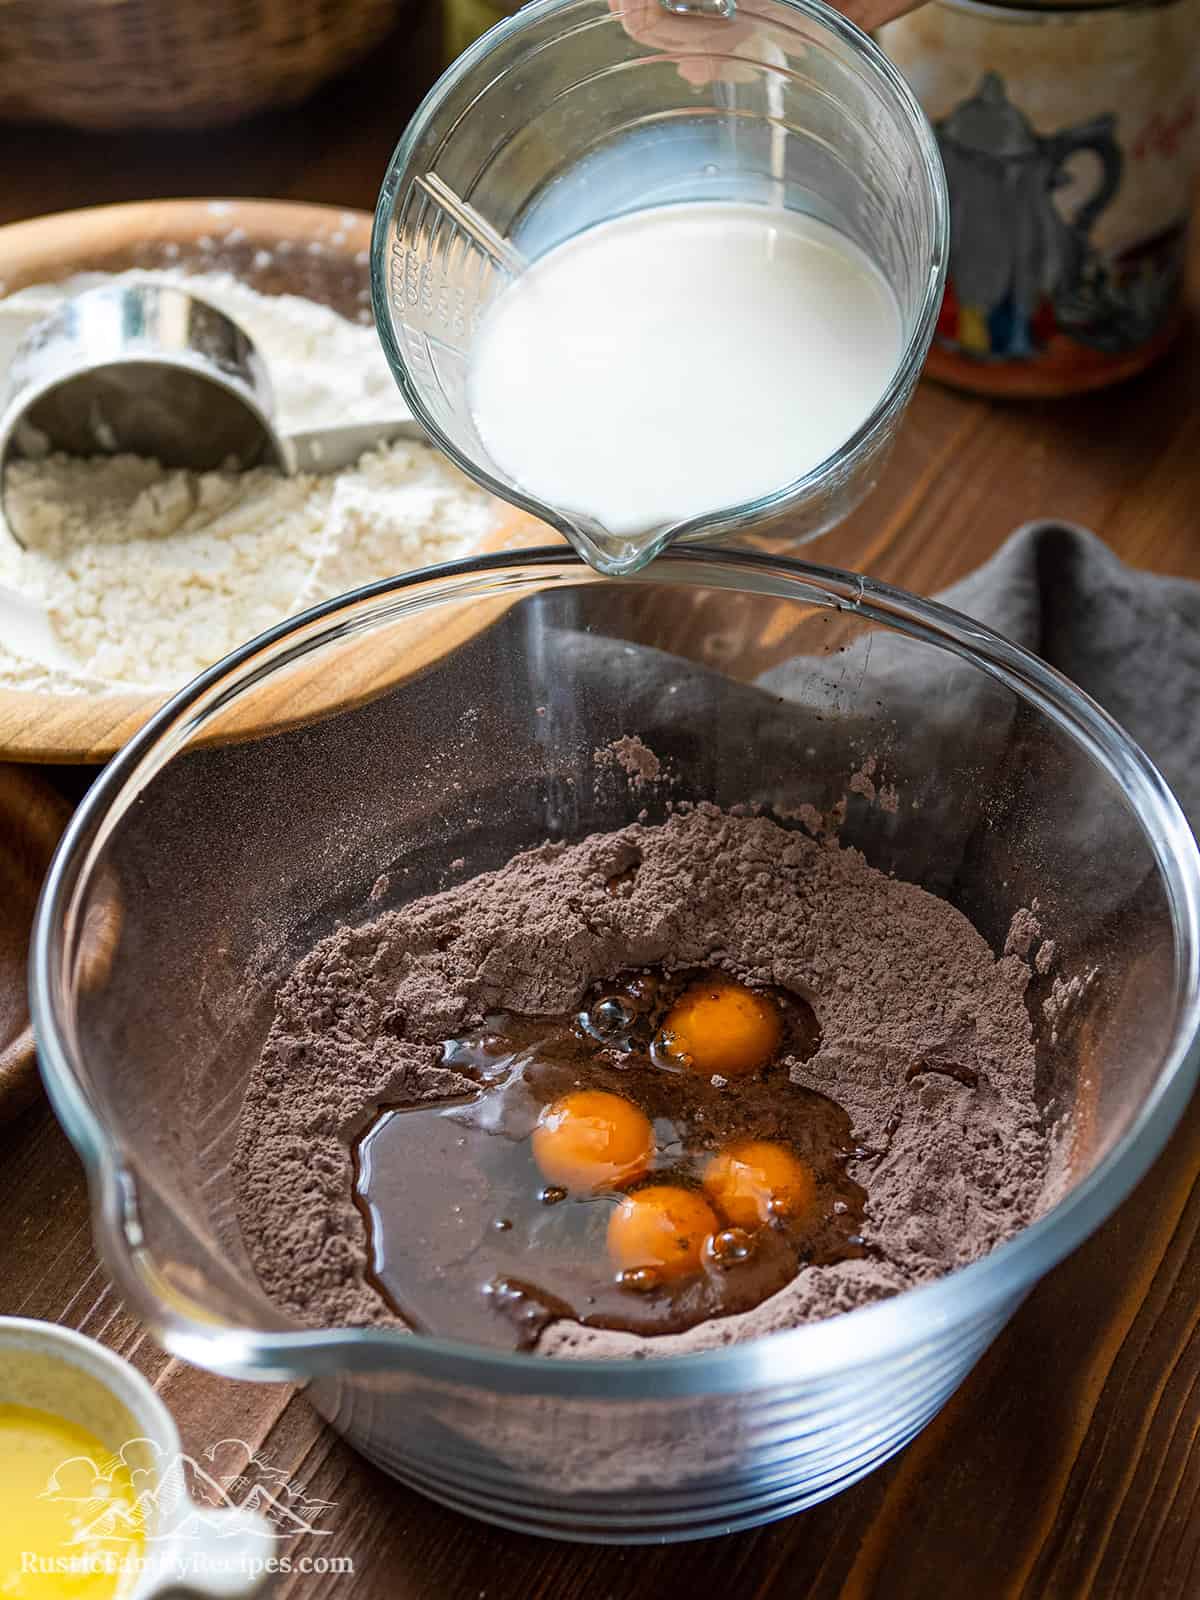 Adding eggs and milk to the dry ingredients in a glass bowl